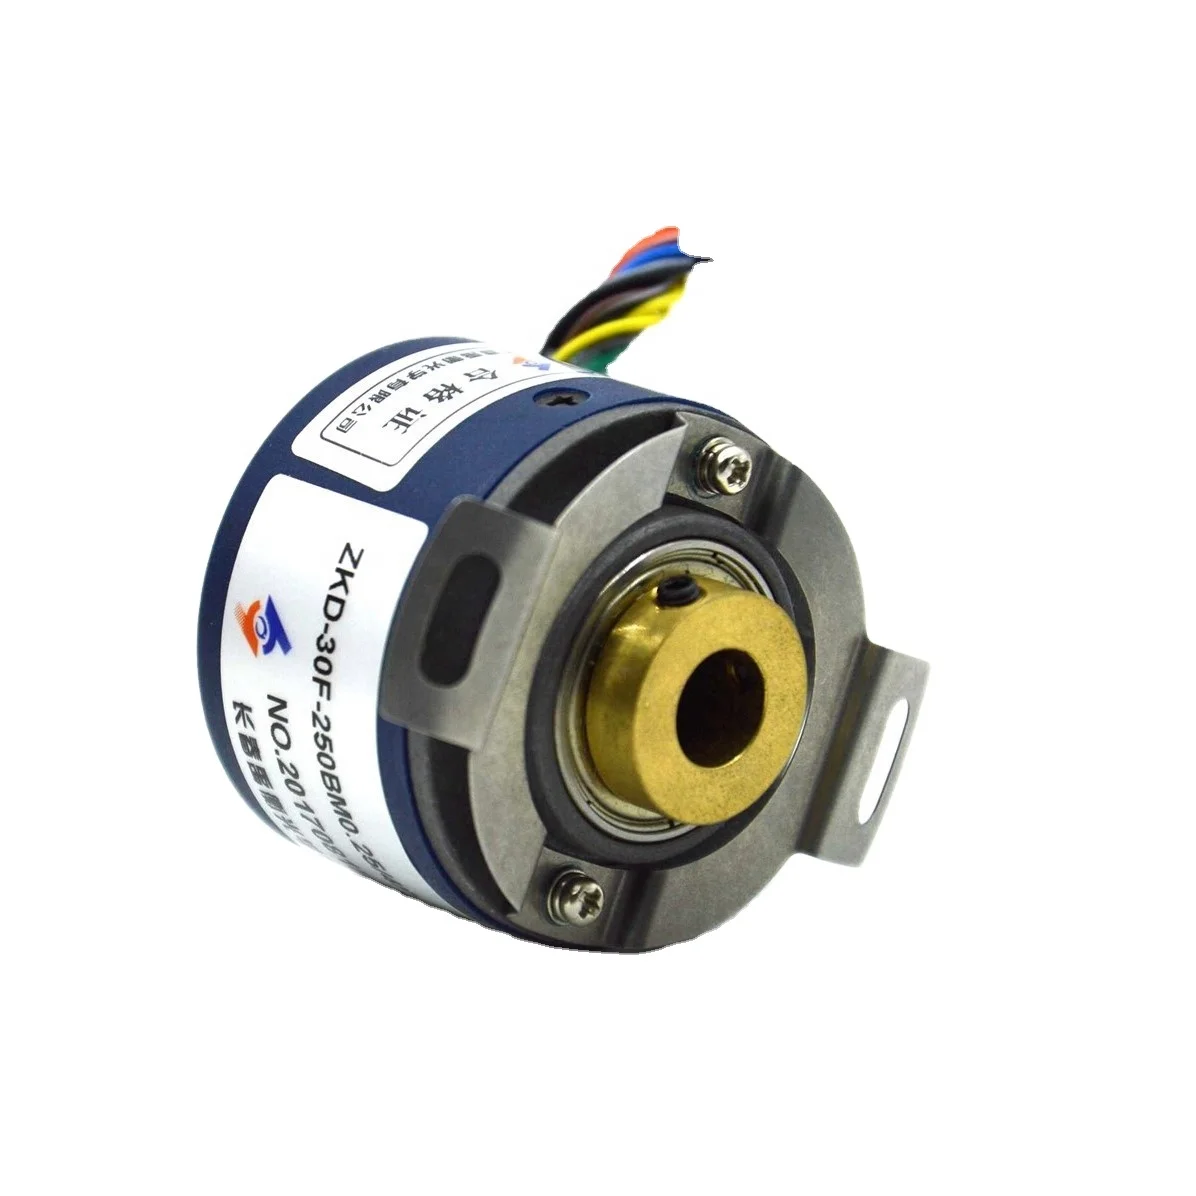 

ZKD-30F-250BM0.25/4P-G05L-B-0.6m YUHENG Hollow shaft rotary encoder New original genuine goods are available from stock